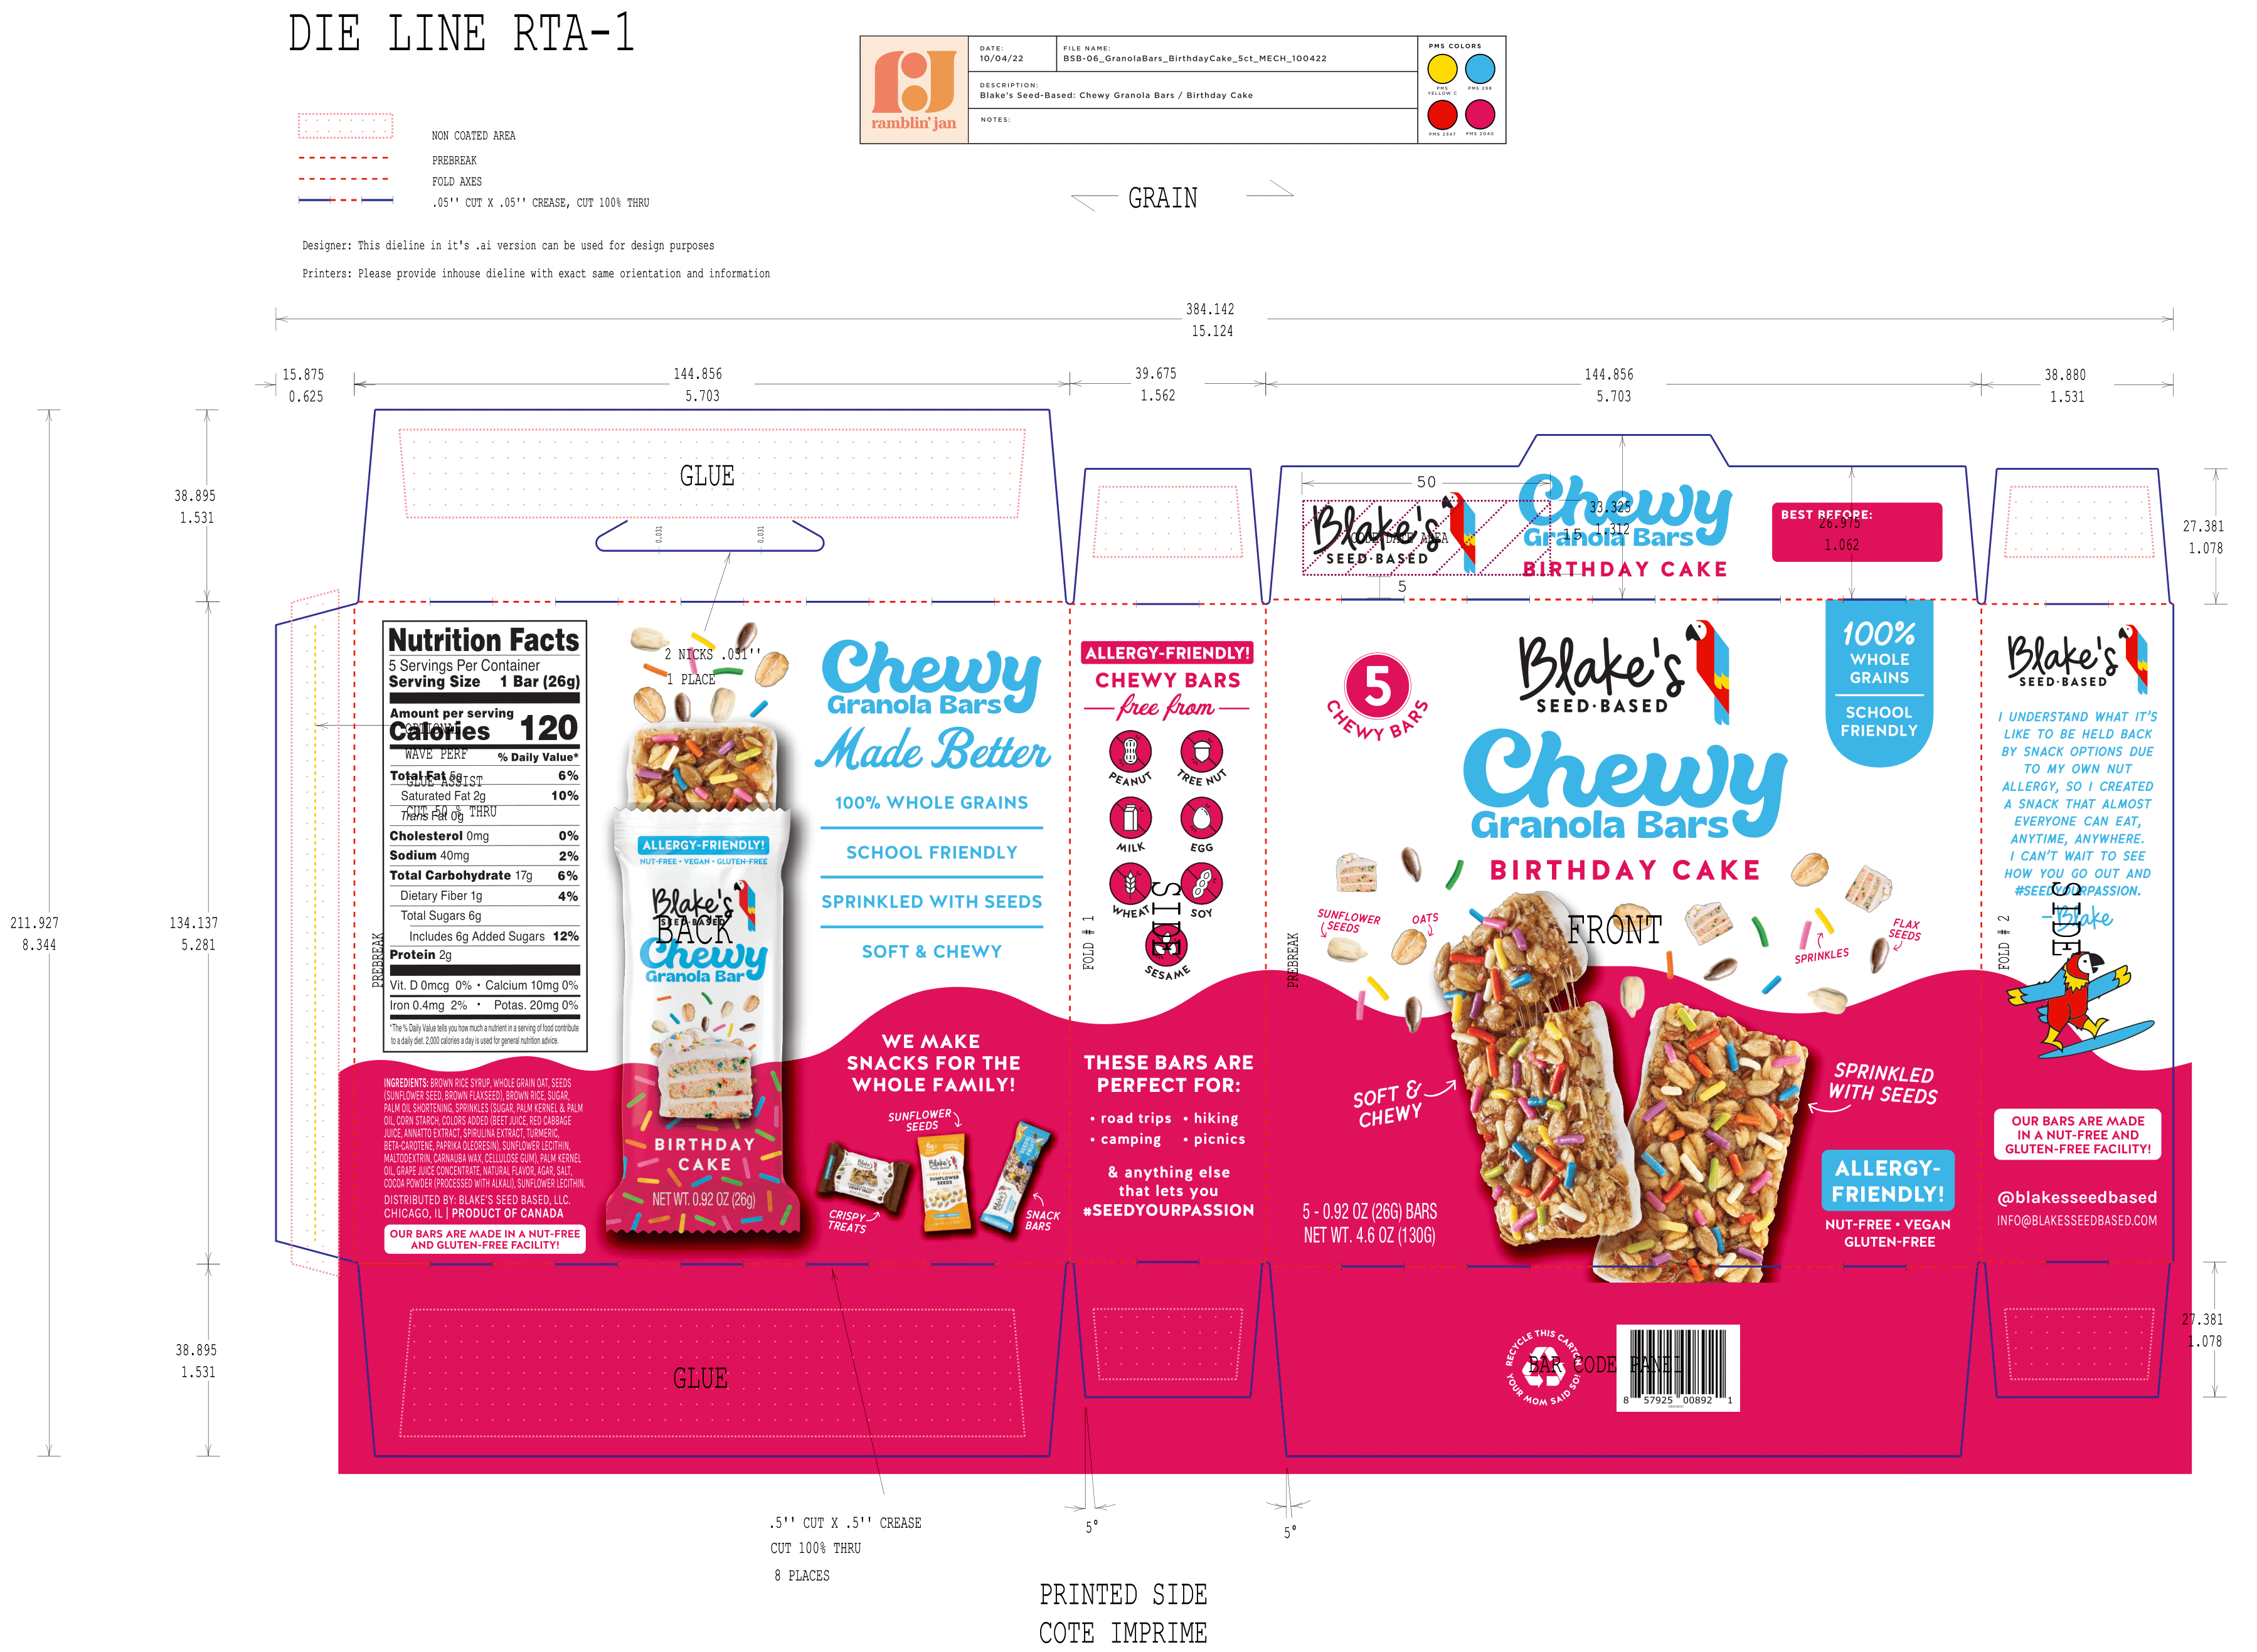 Blake's Seed Based Birthday Cake Chewy Granola Bar 12 innerpacks per case 4.6 oz Product Label